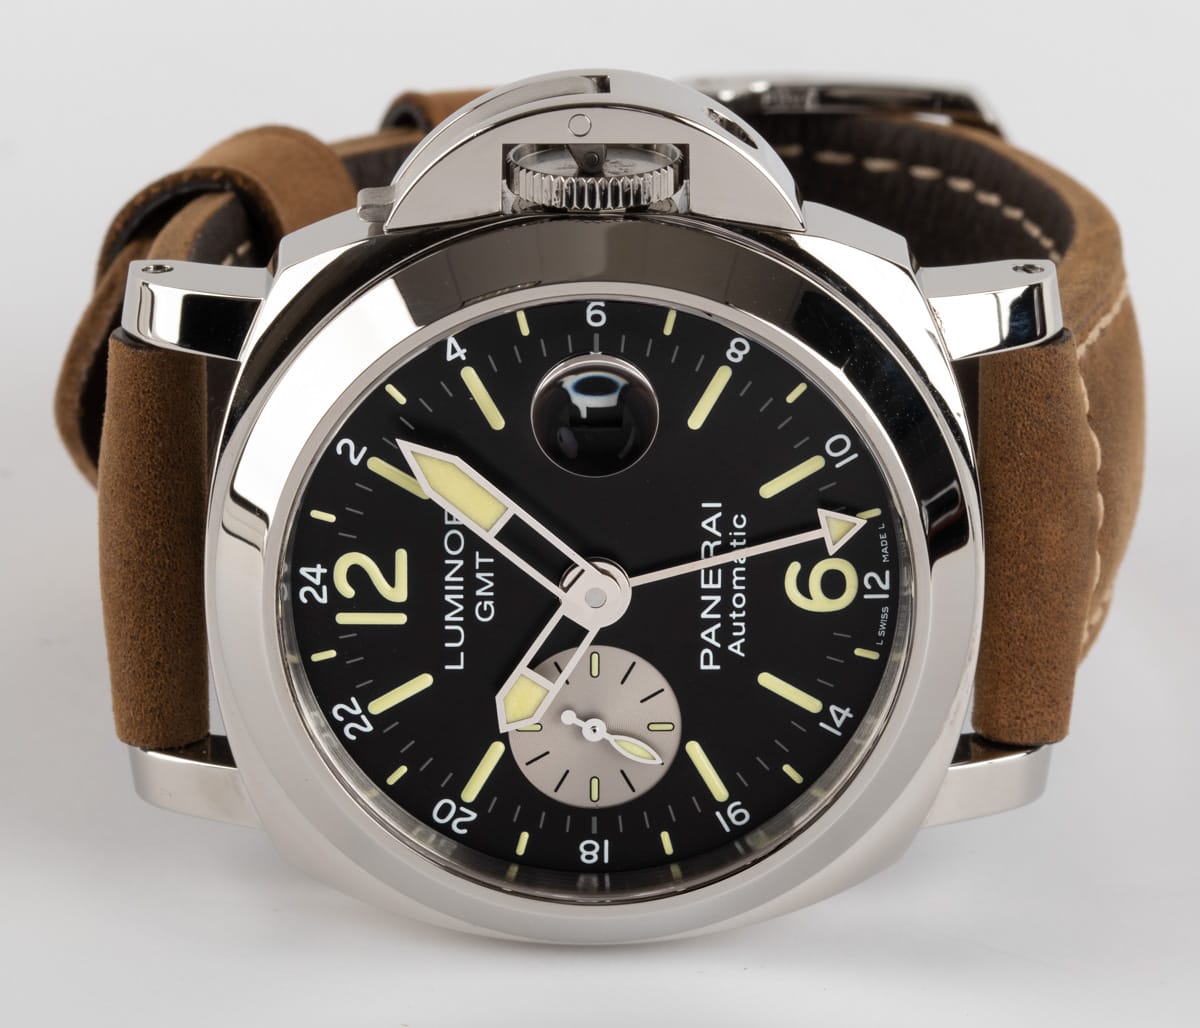 Front View of Luminor GMT